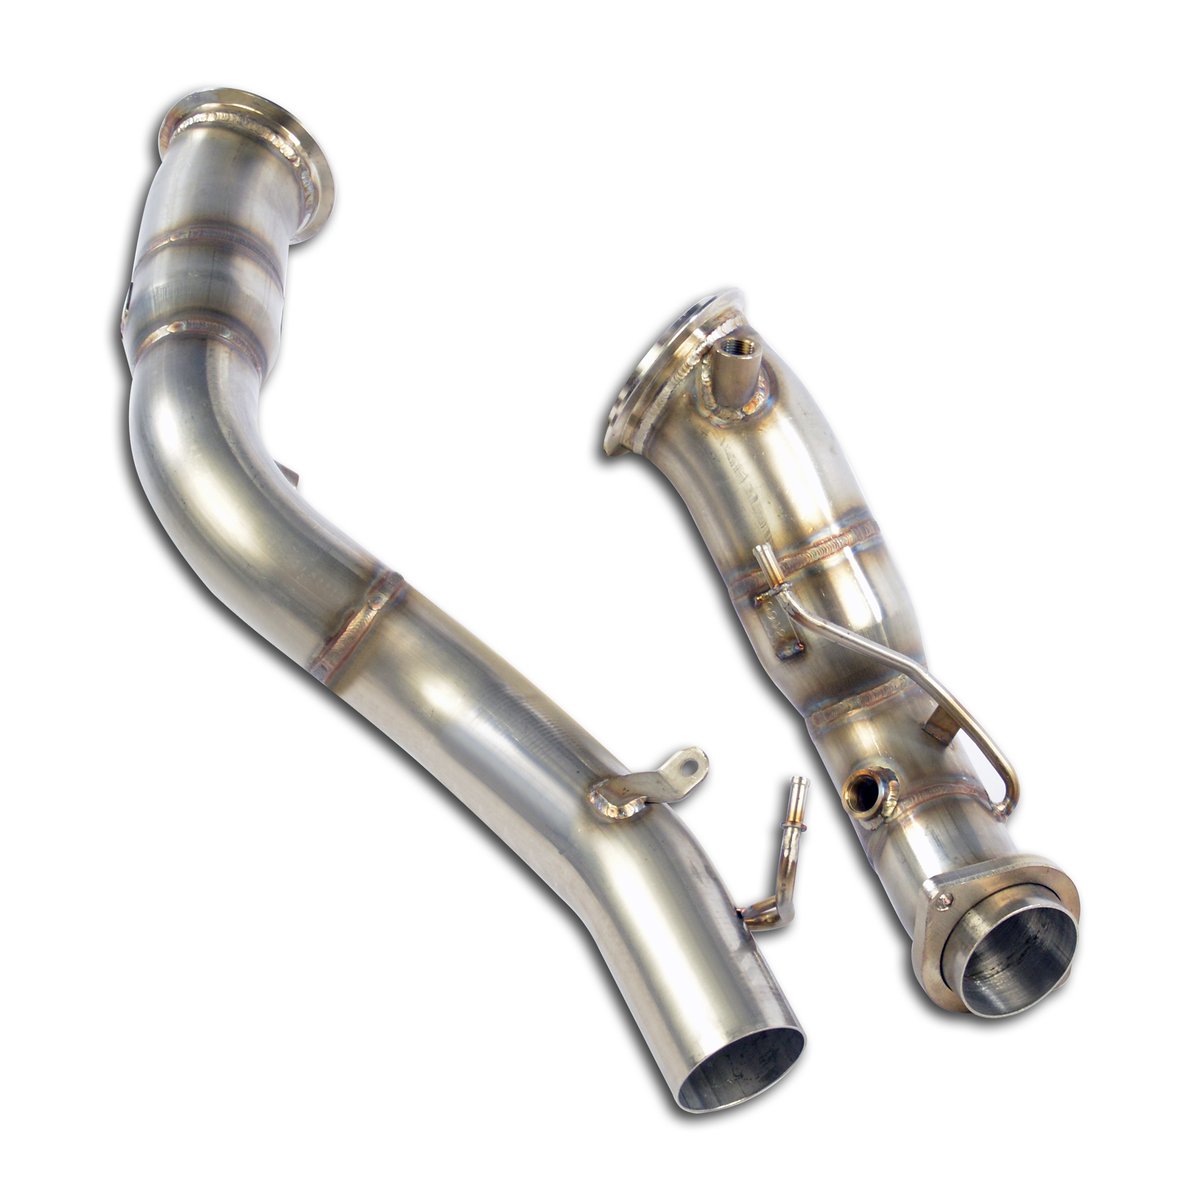 Supersprint Downpipe 525311